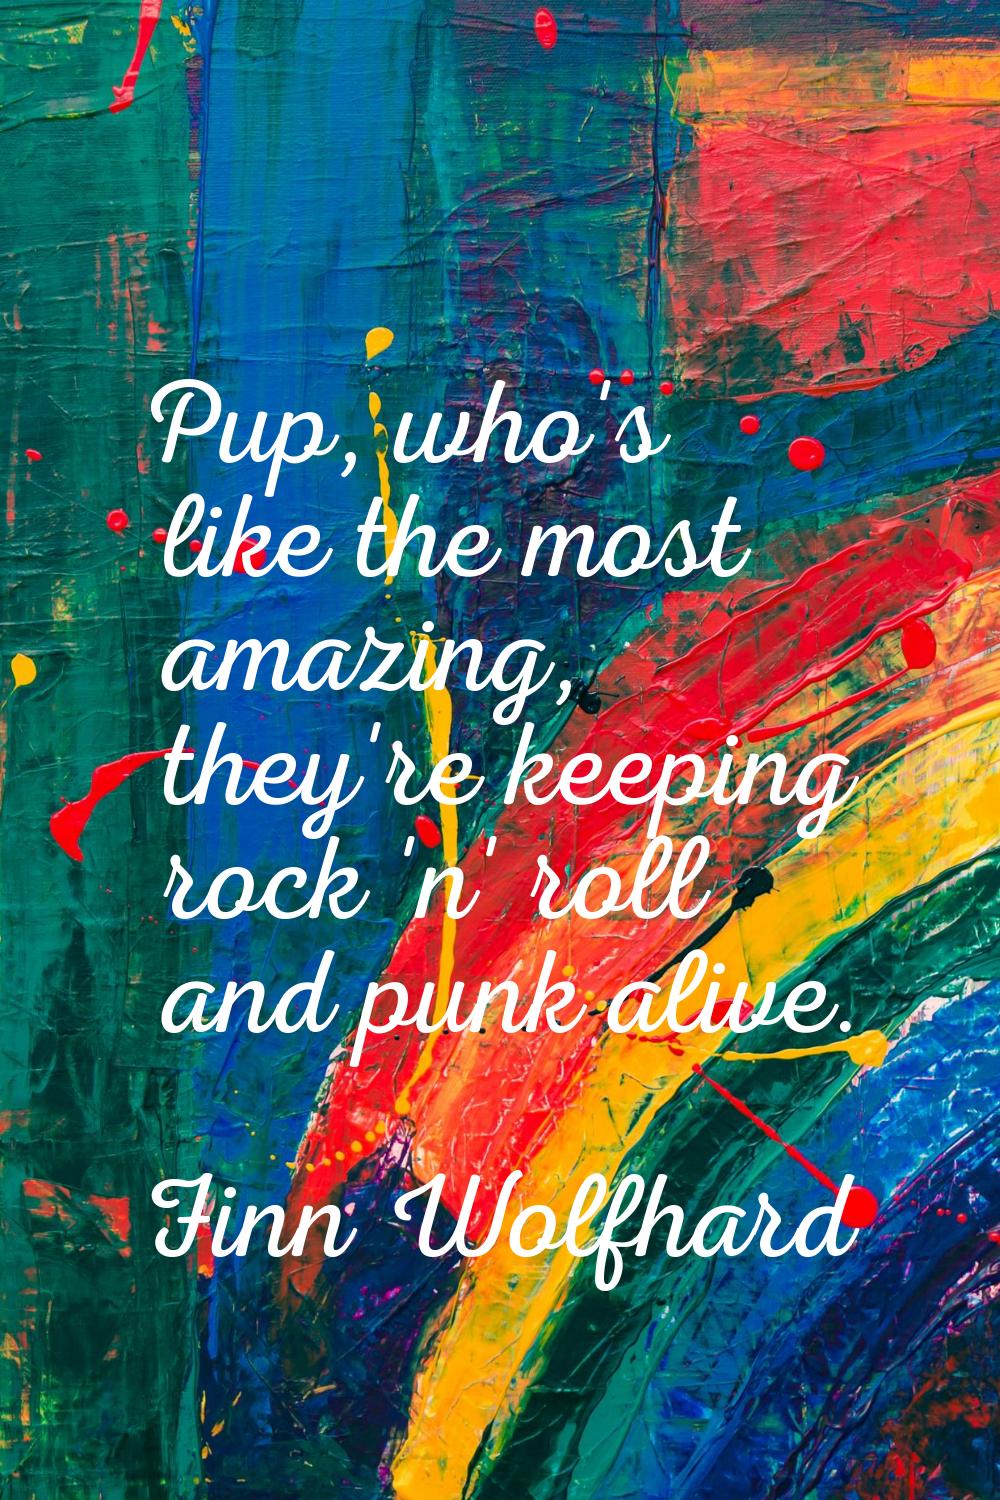 Pup, who's like the most amazing, they're keeping rock 'n' roll and punk alive.